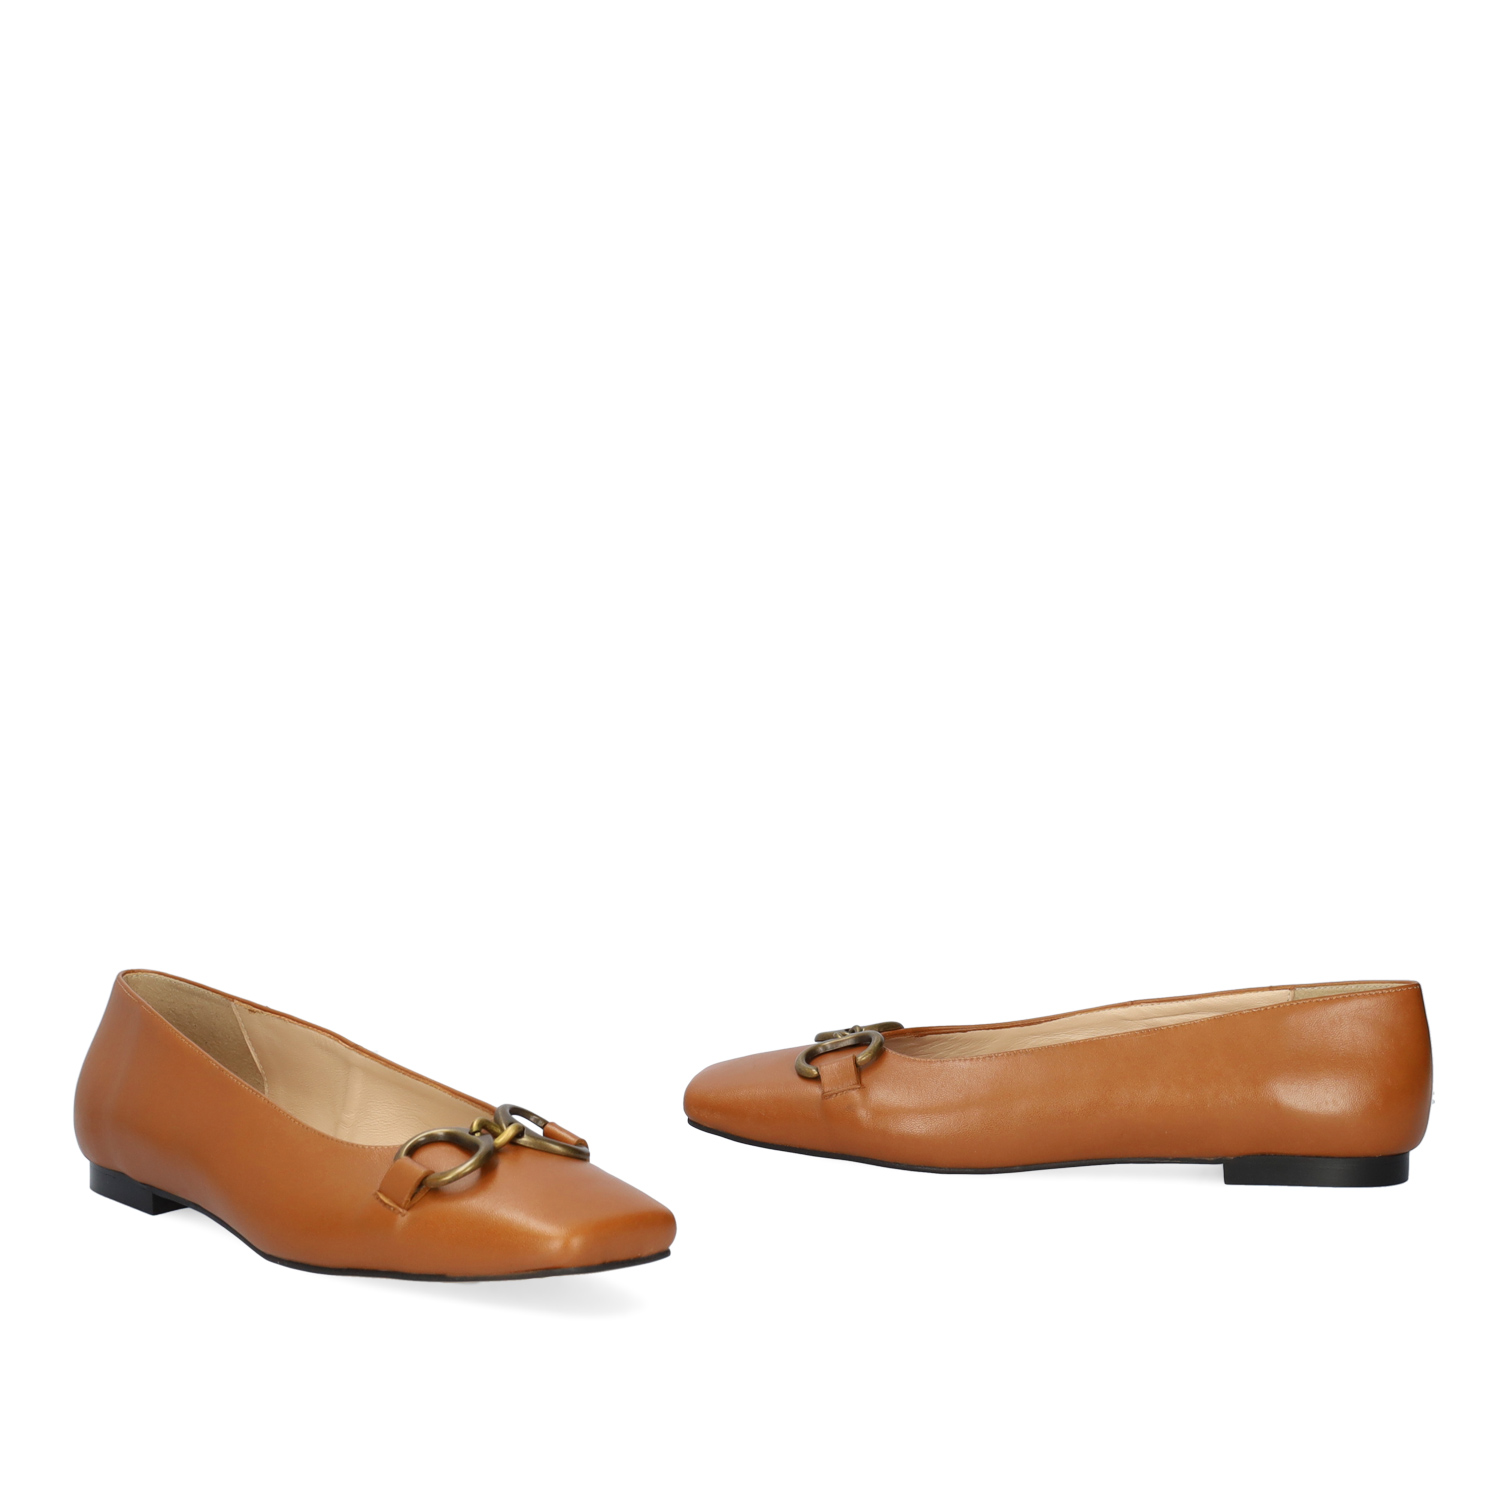 Square toe ballerina flats in brown leather 